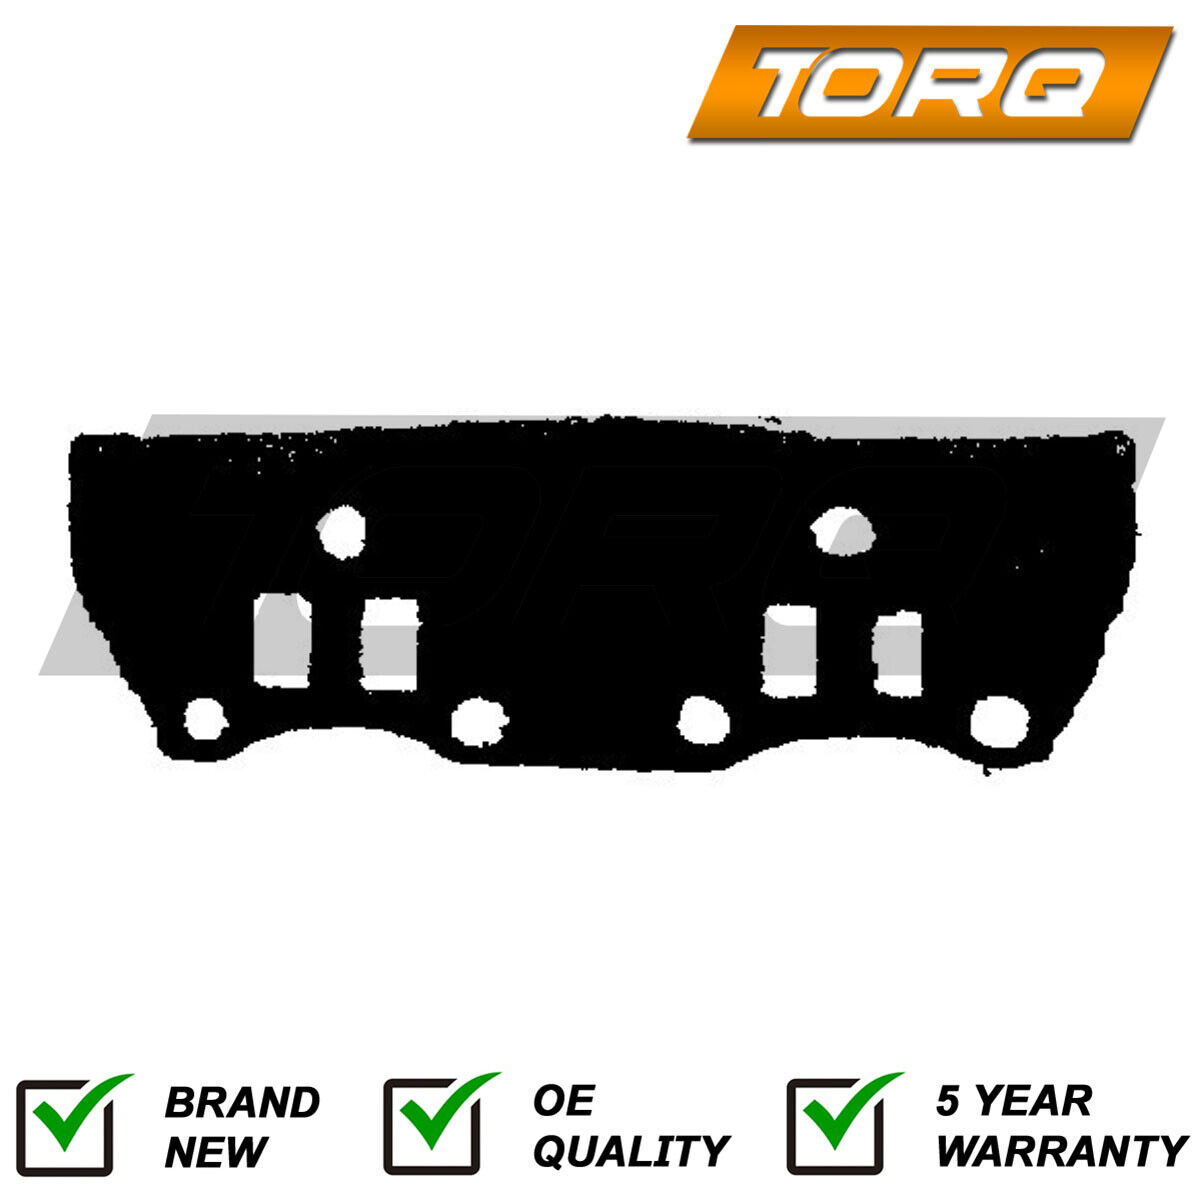 Exhaust Manifold Gasket Torq Fits Colt Compact Wira Satria 1.3 1.5 MD150525